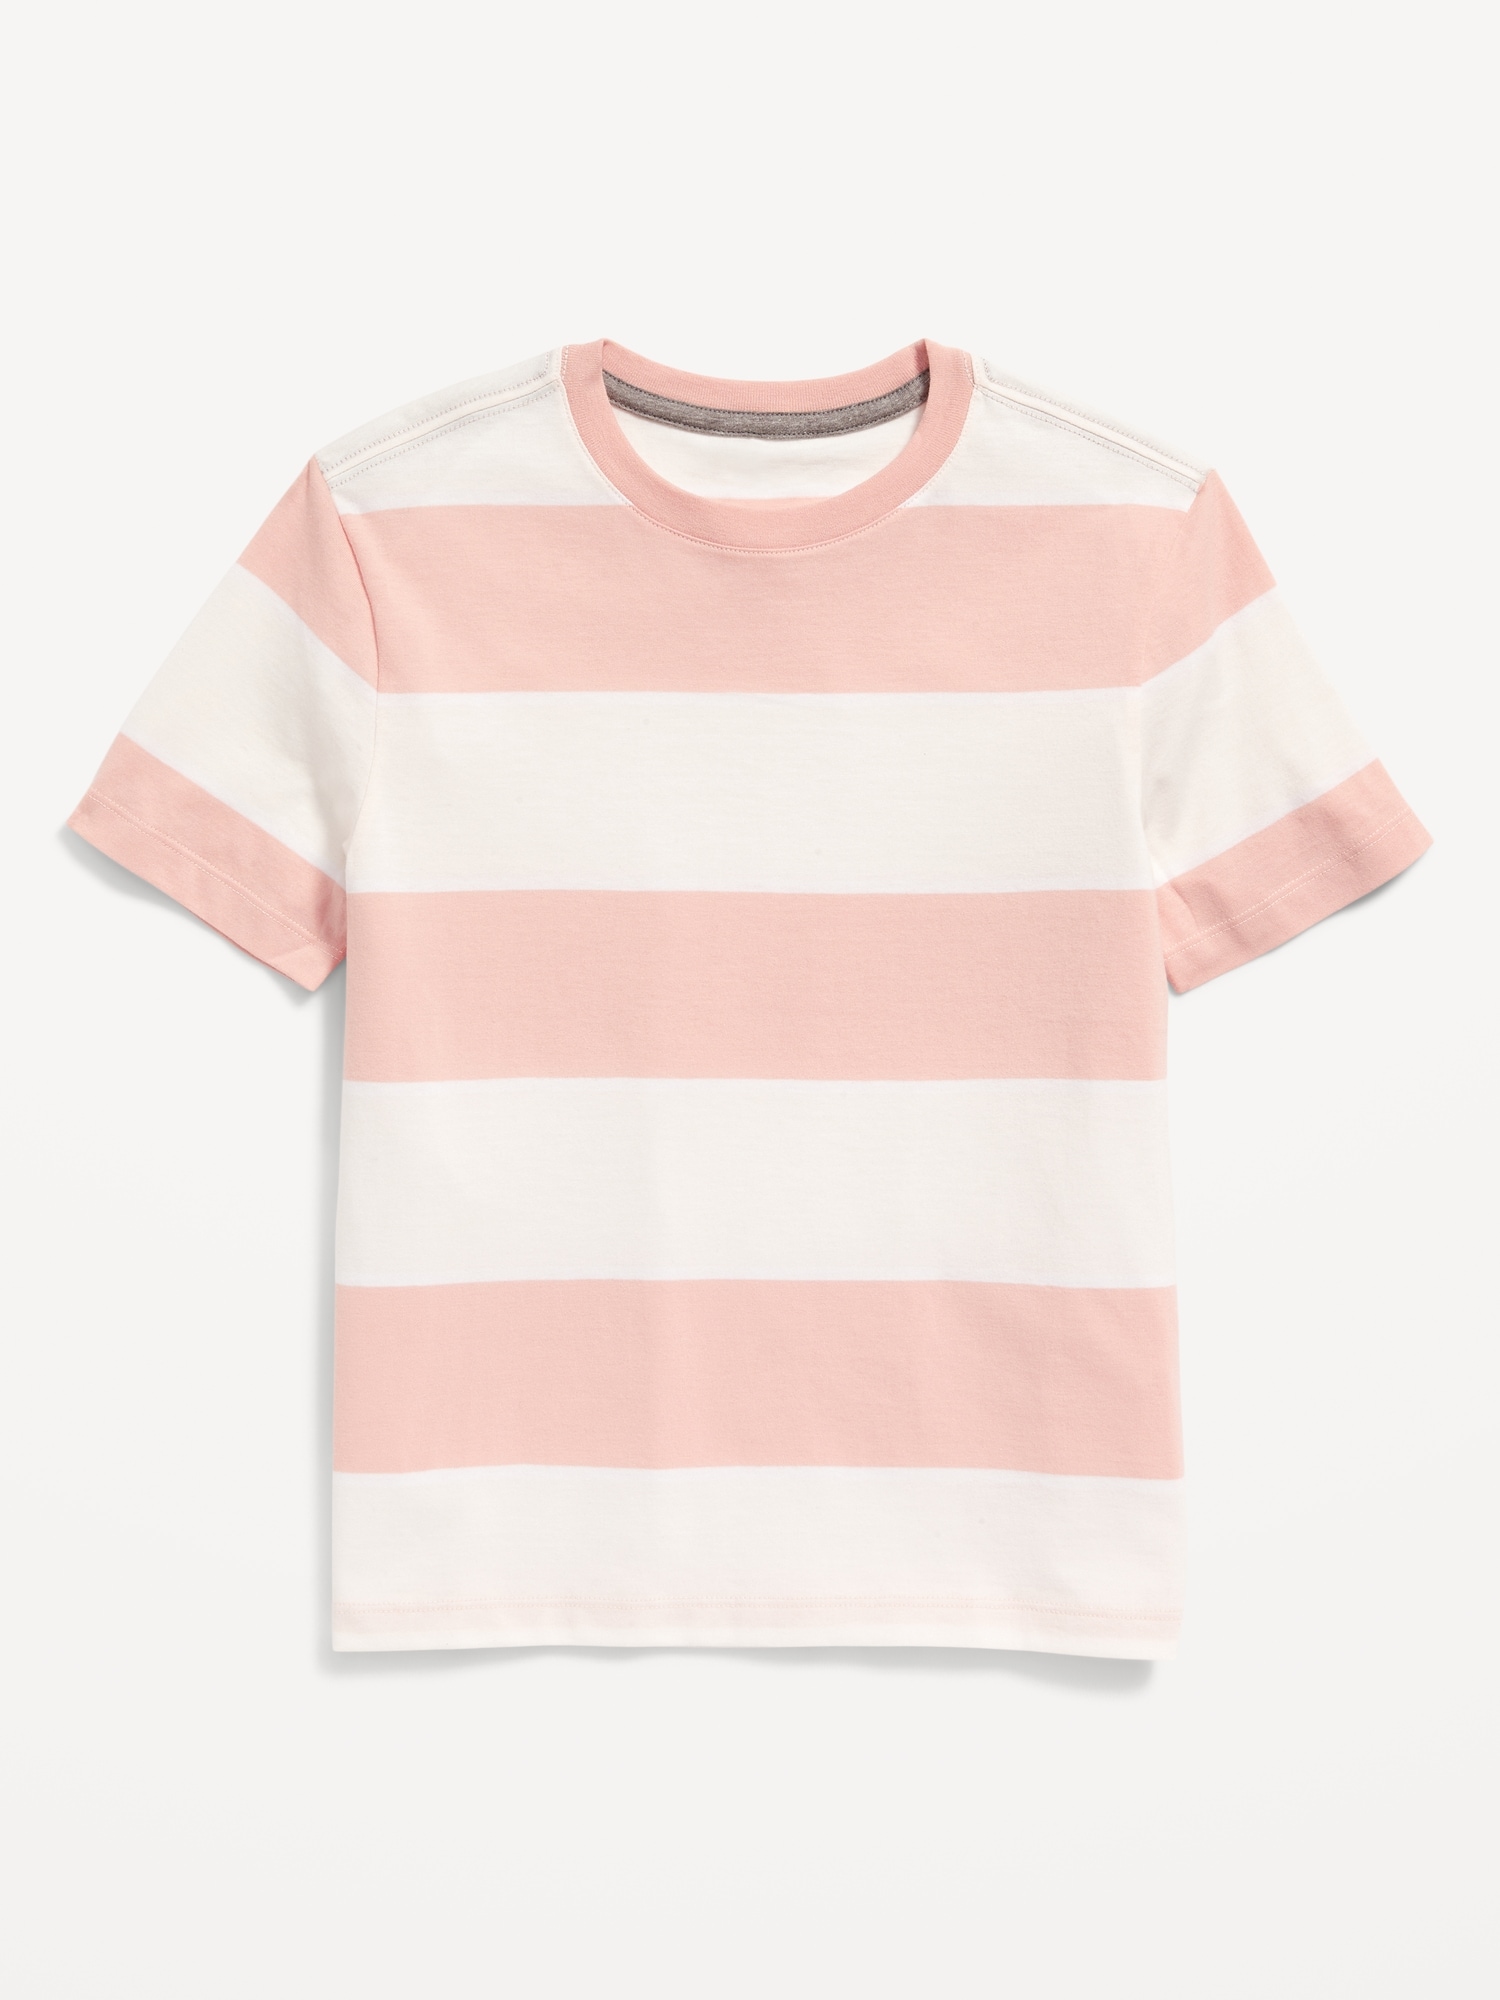 Old Navy Softest Short-Sleeve Striped T-Shirt for Boys pink. 1